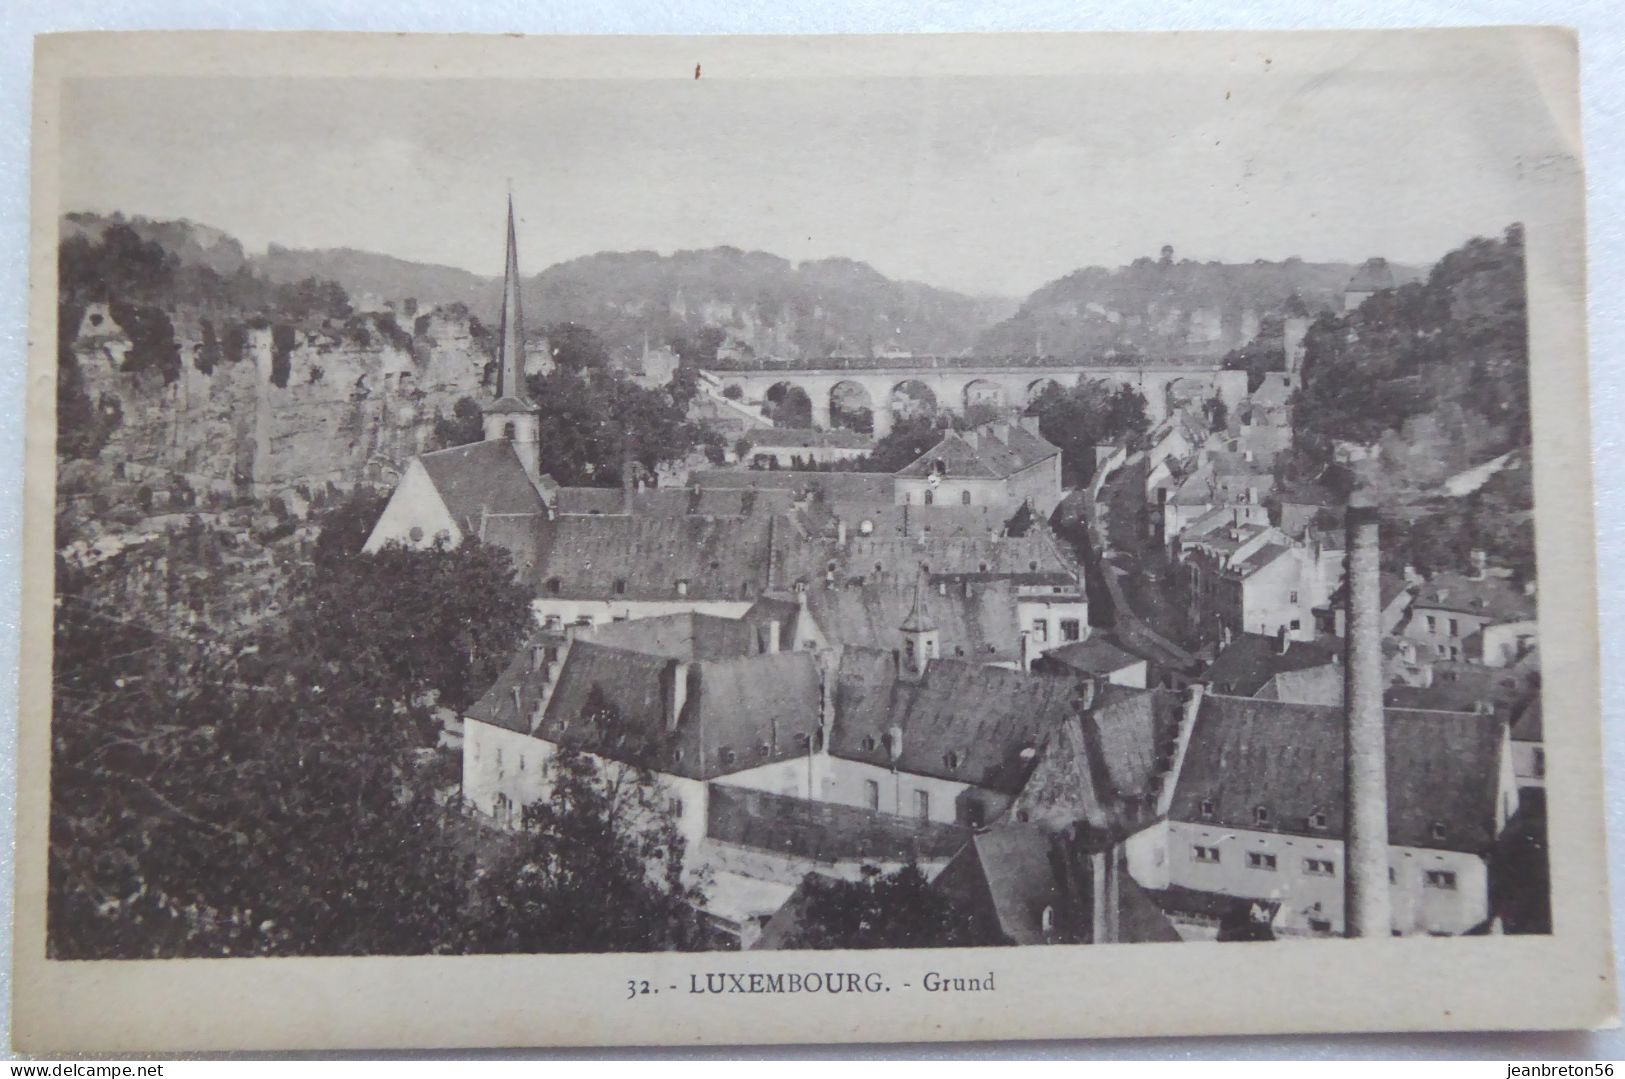 LUXEMBOURG. - Grund - CPA 1922 - Luxembourg - Ville